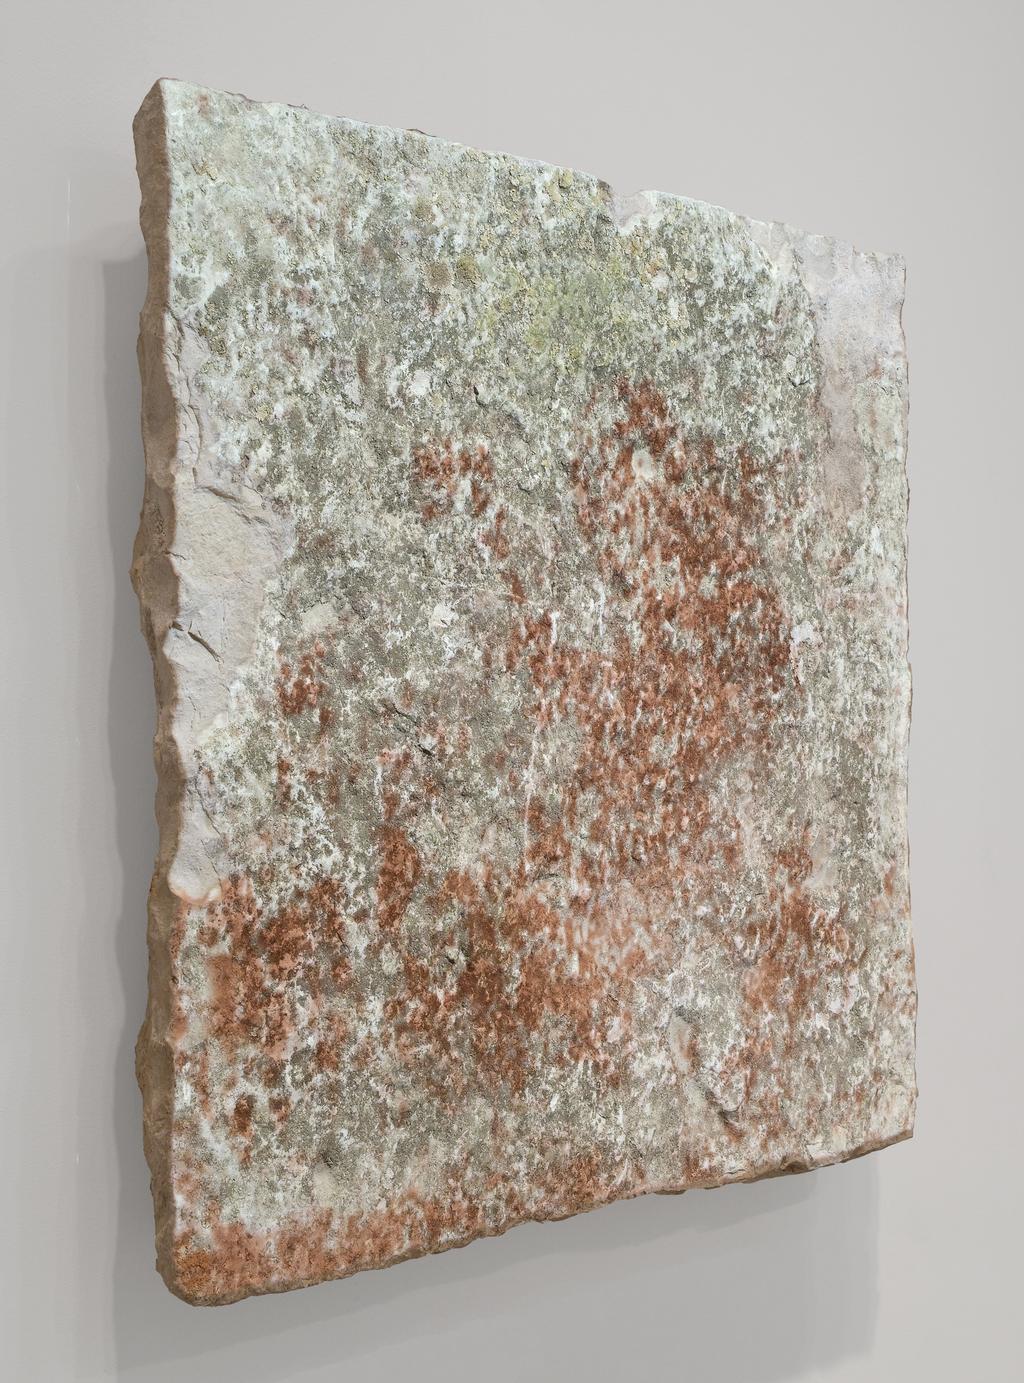 Michal Rovner, Satat, 2008, stone with digital projection, 33 x 34 x 3.